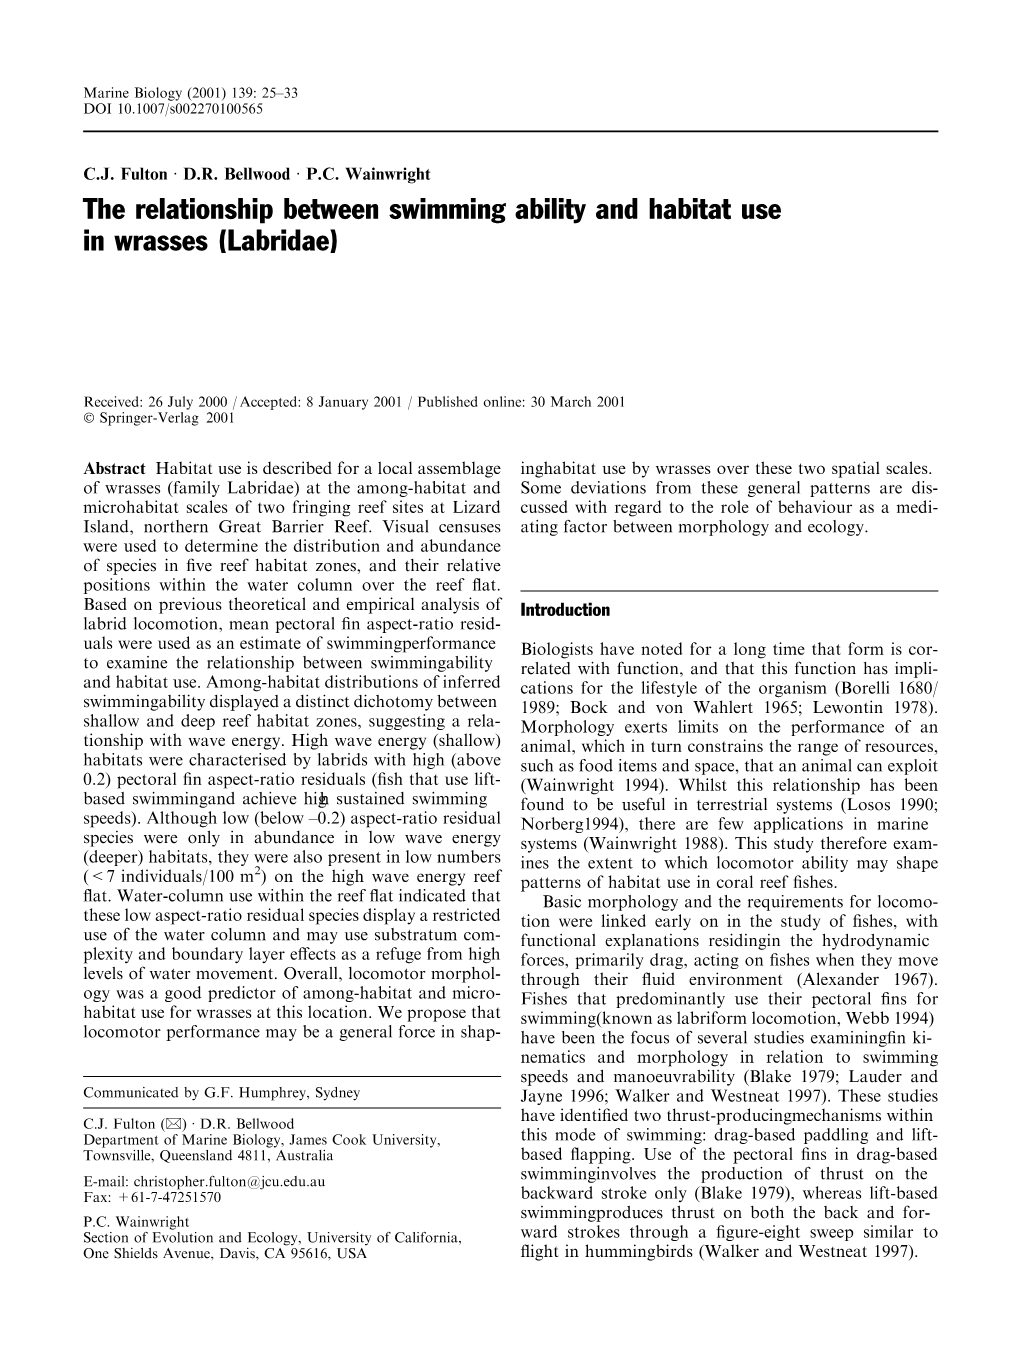 The Relationship Between Swimming Ability and Habitat Use in Wrasses Labridae)